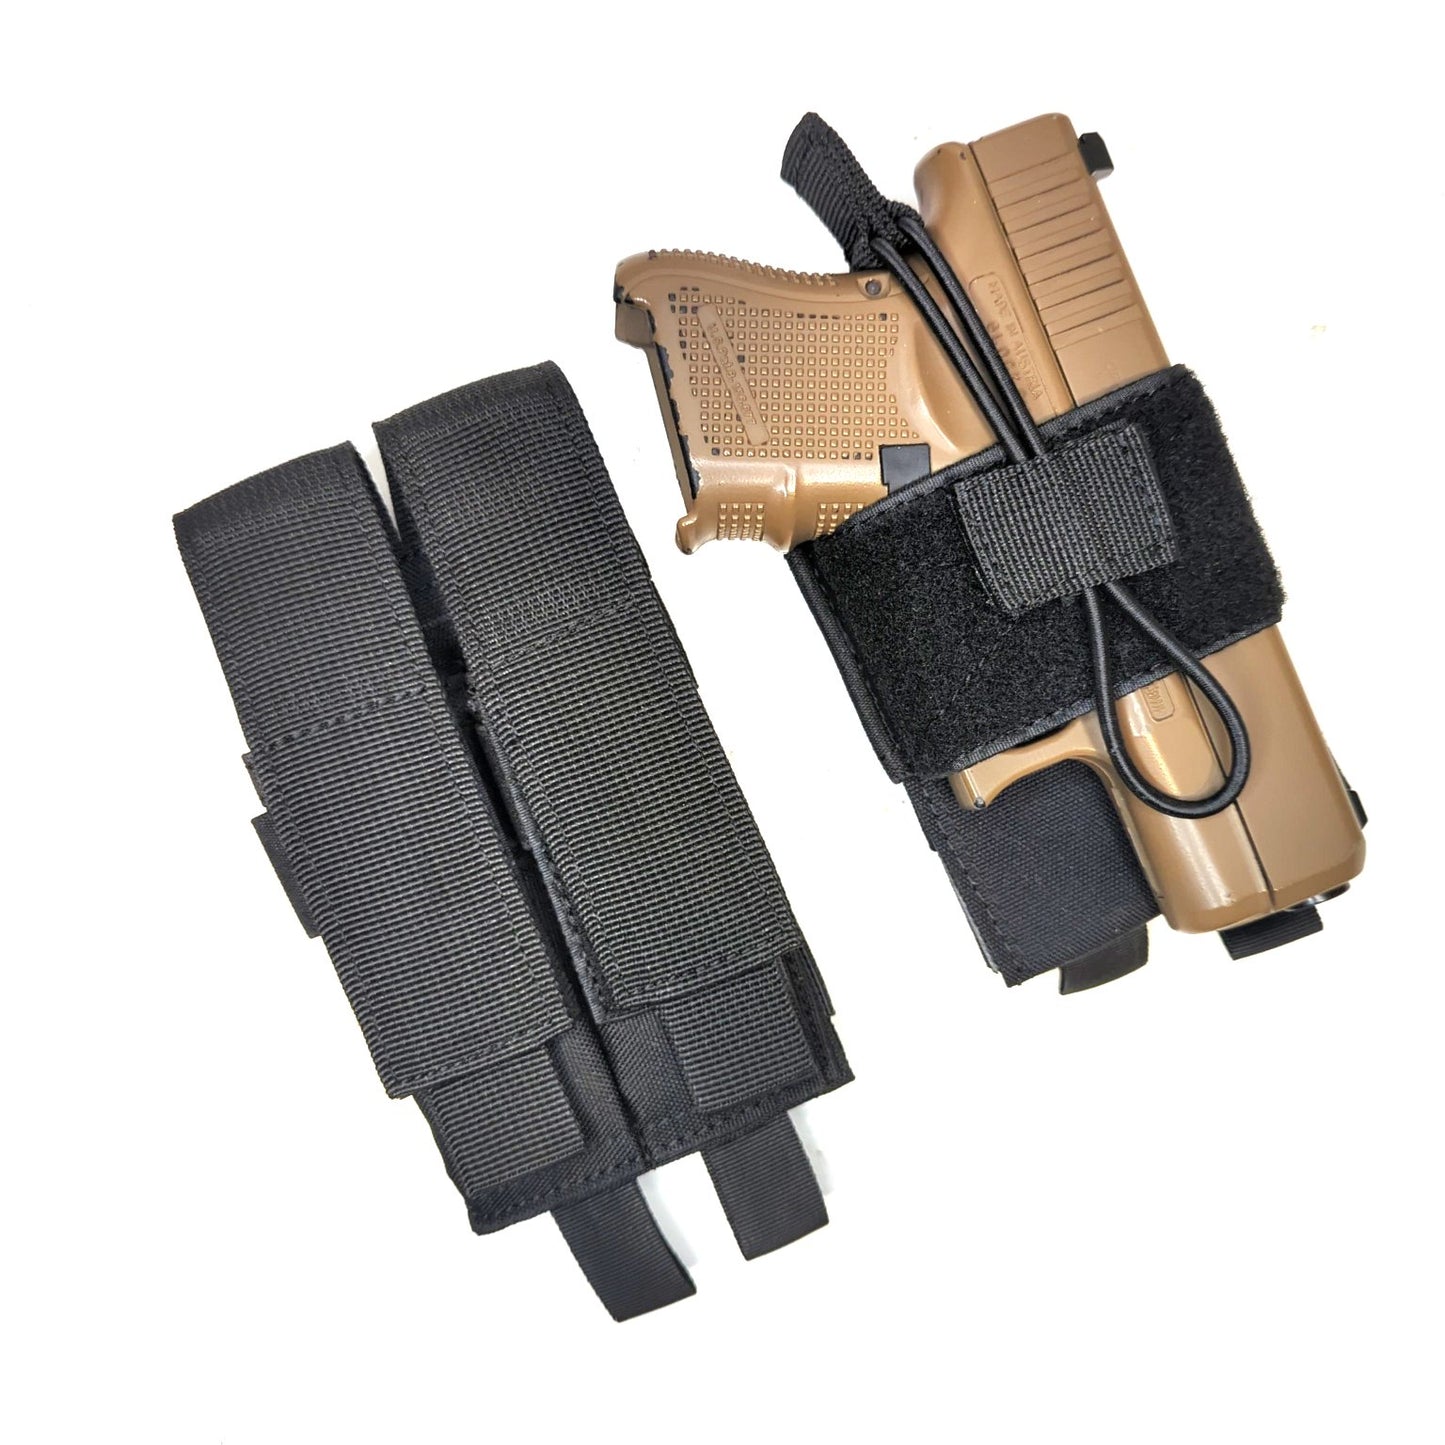 Universal MOLLE Holster Attachment pouch